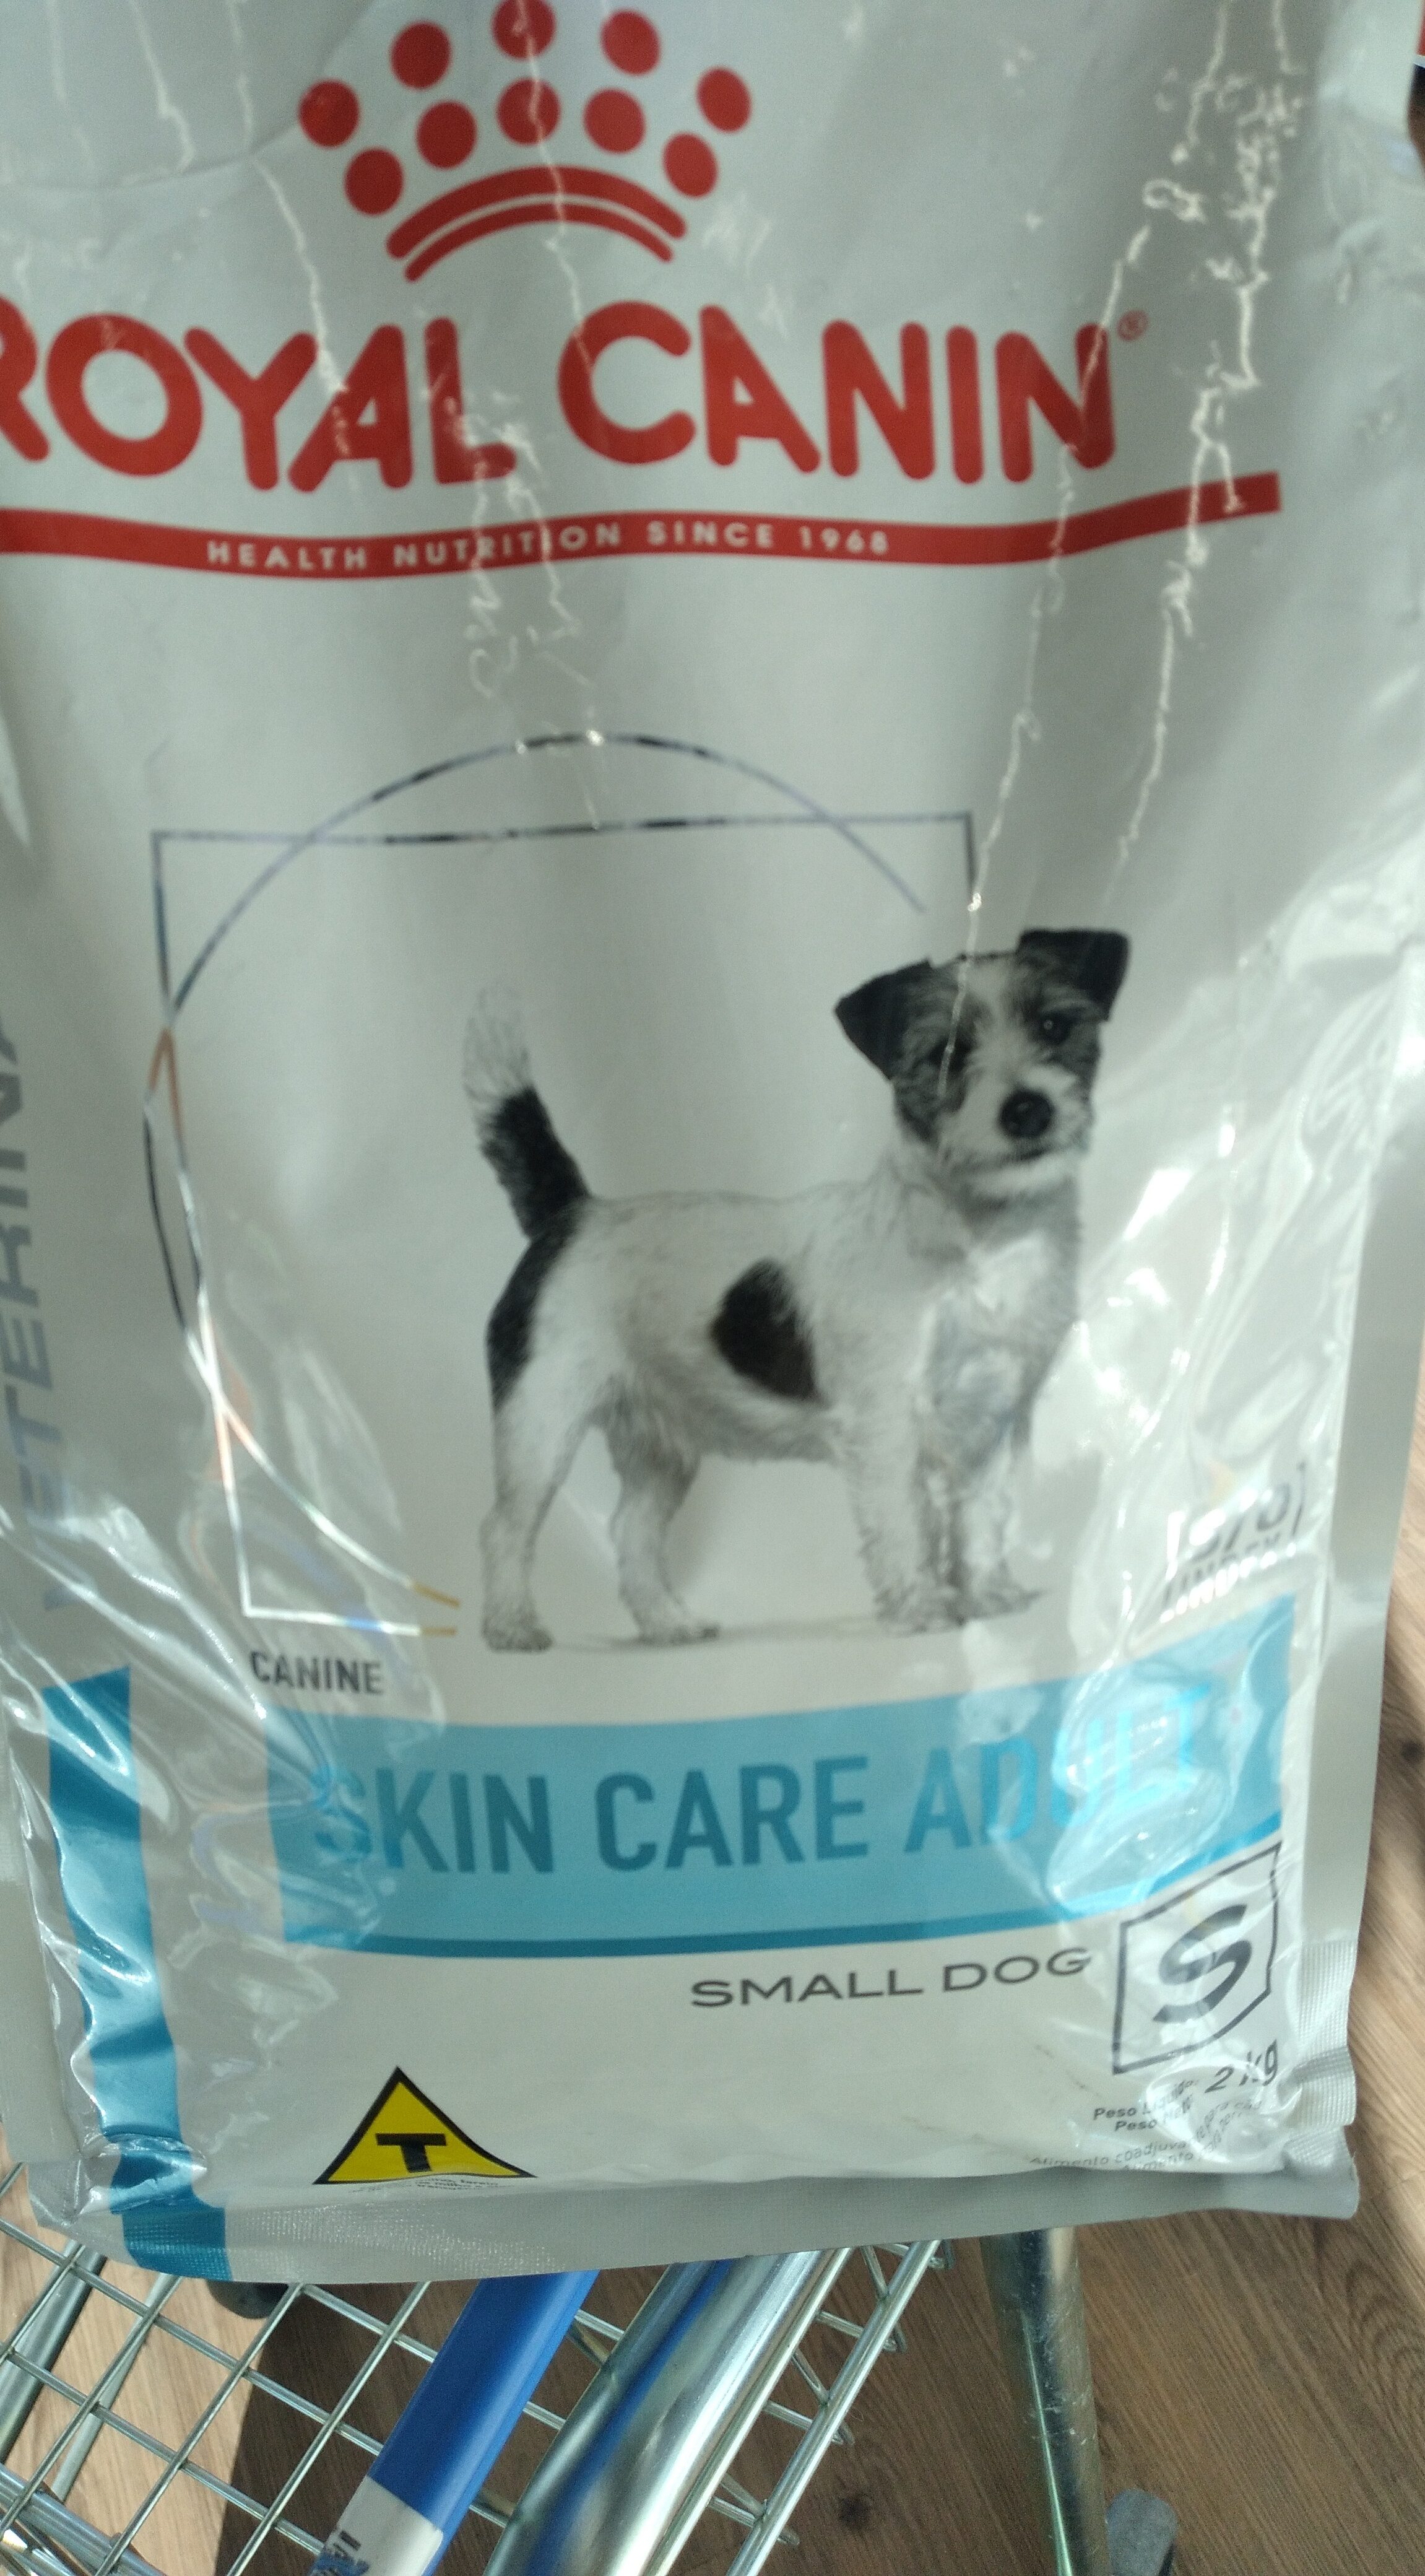 Royal Canin Skin Care Adulto Small dog 2kg - Product - pt